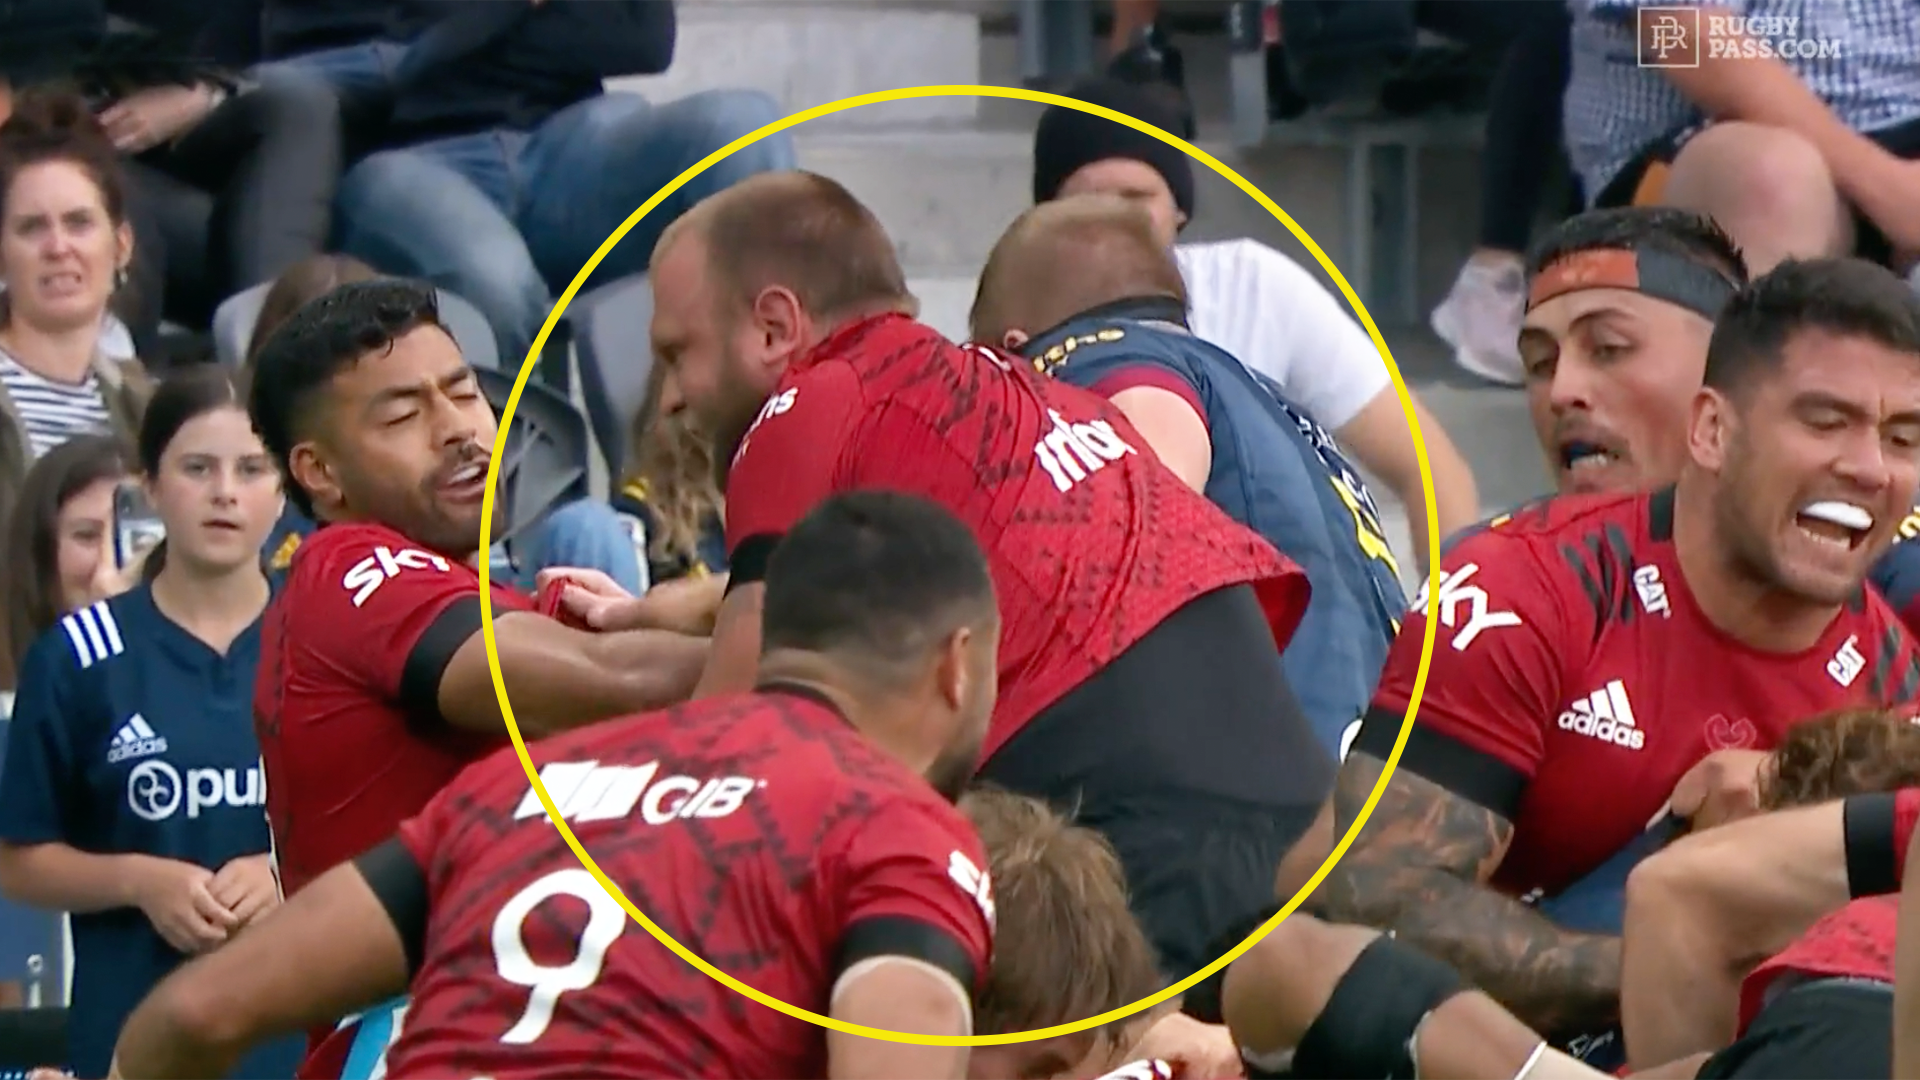 Outrage as officials turn blind eye to sickening flurry of punches in Super Rugby opener